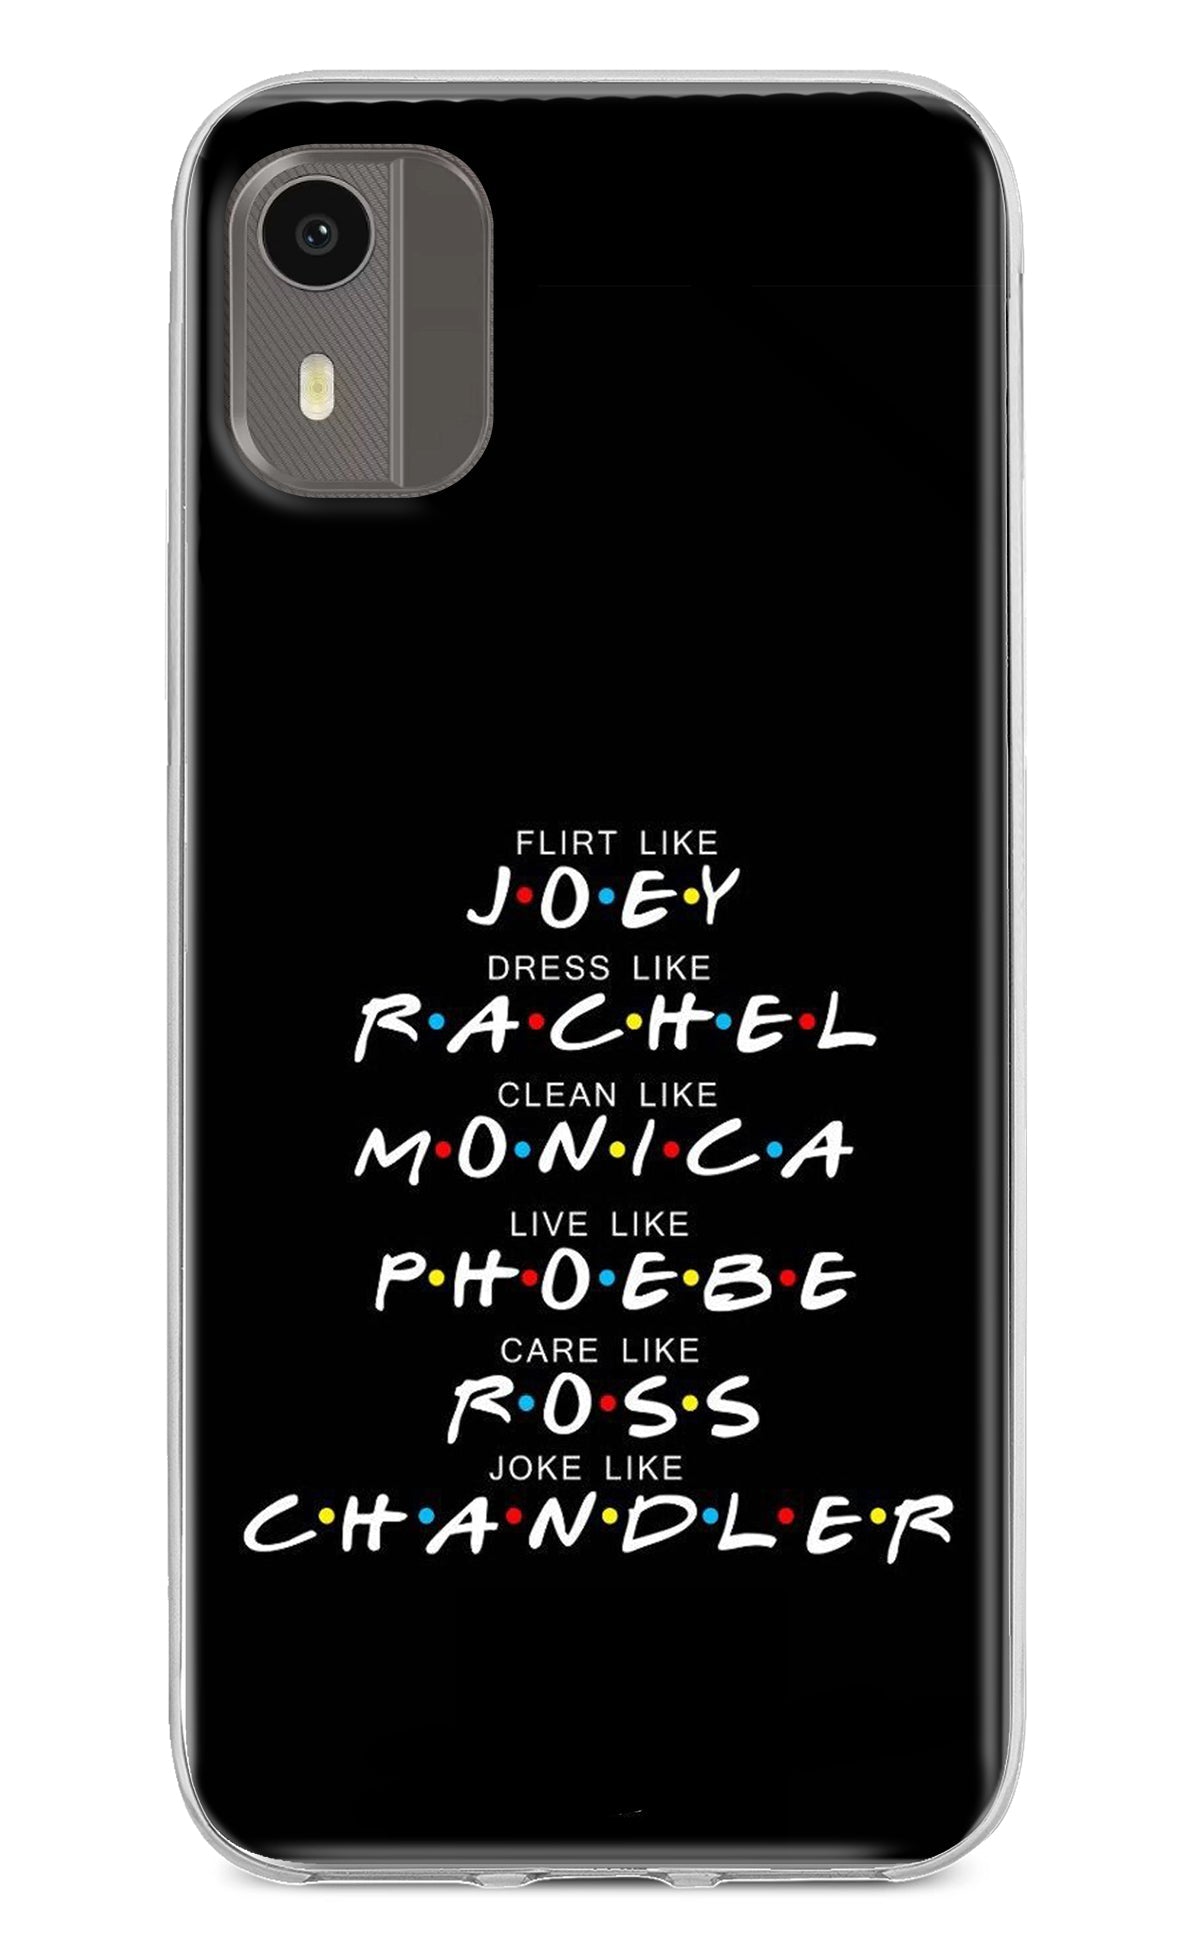 FRIENDS Character Nokia C12/C12 Pro Back Cover